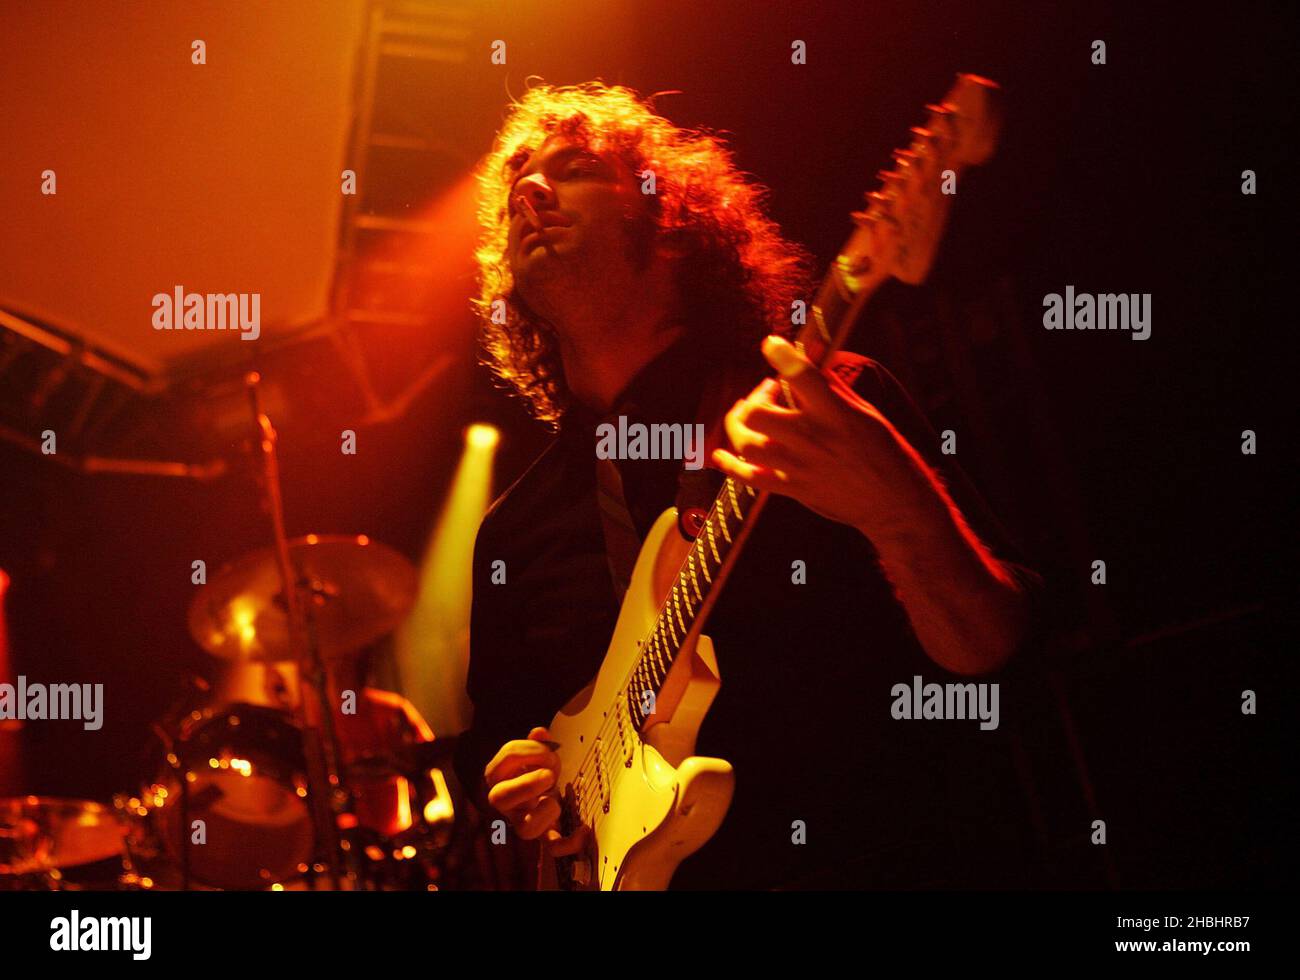 Albert Hammond Junior of New York indie group The Strokes play their first London date of the UK tour promoting their third album 'First Impressions Of Earth', released January 9, at Shepherds Bush Empire in London. Stock Photo